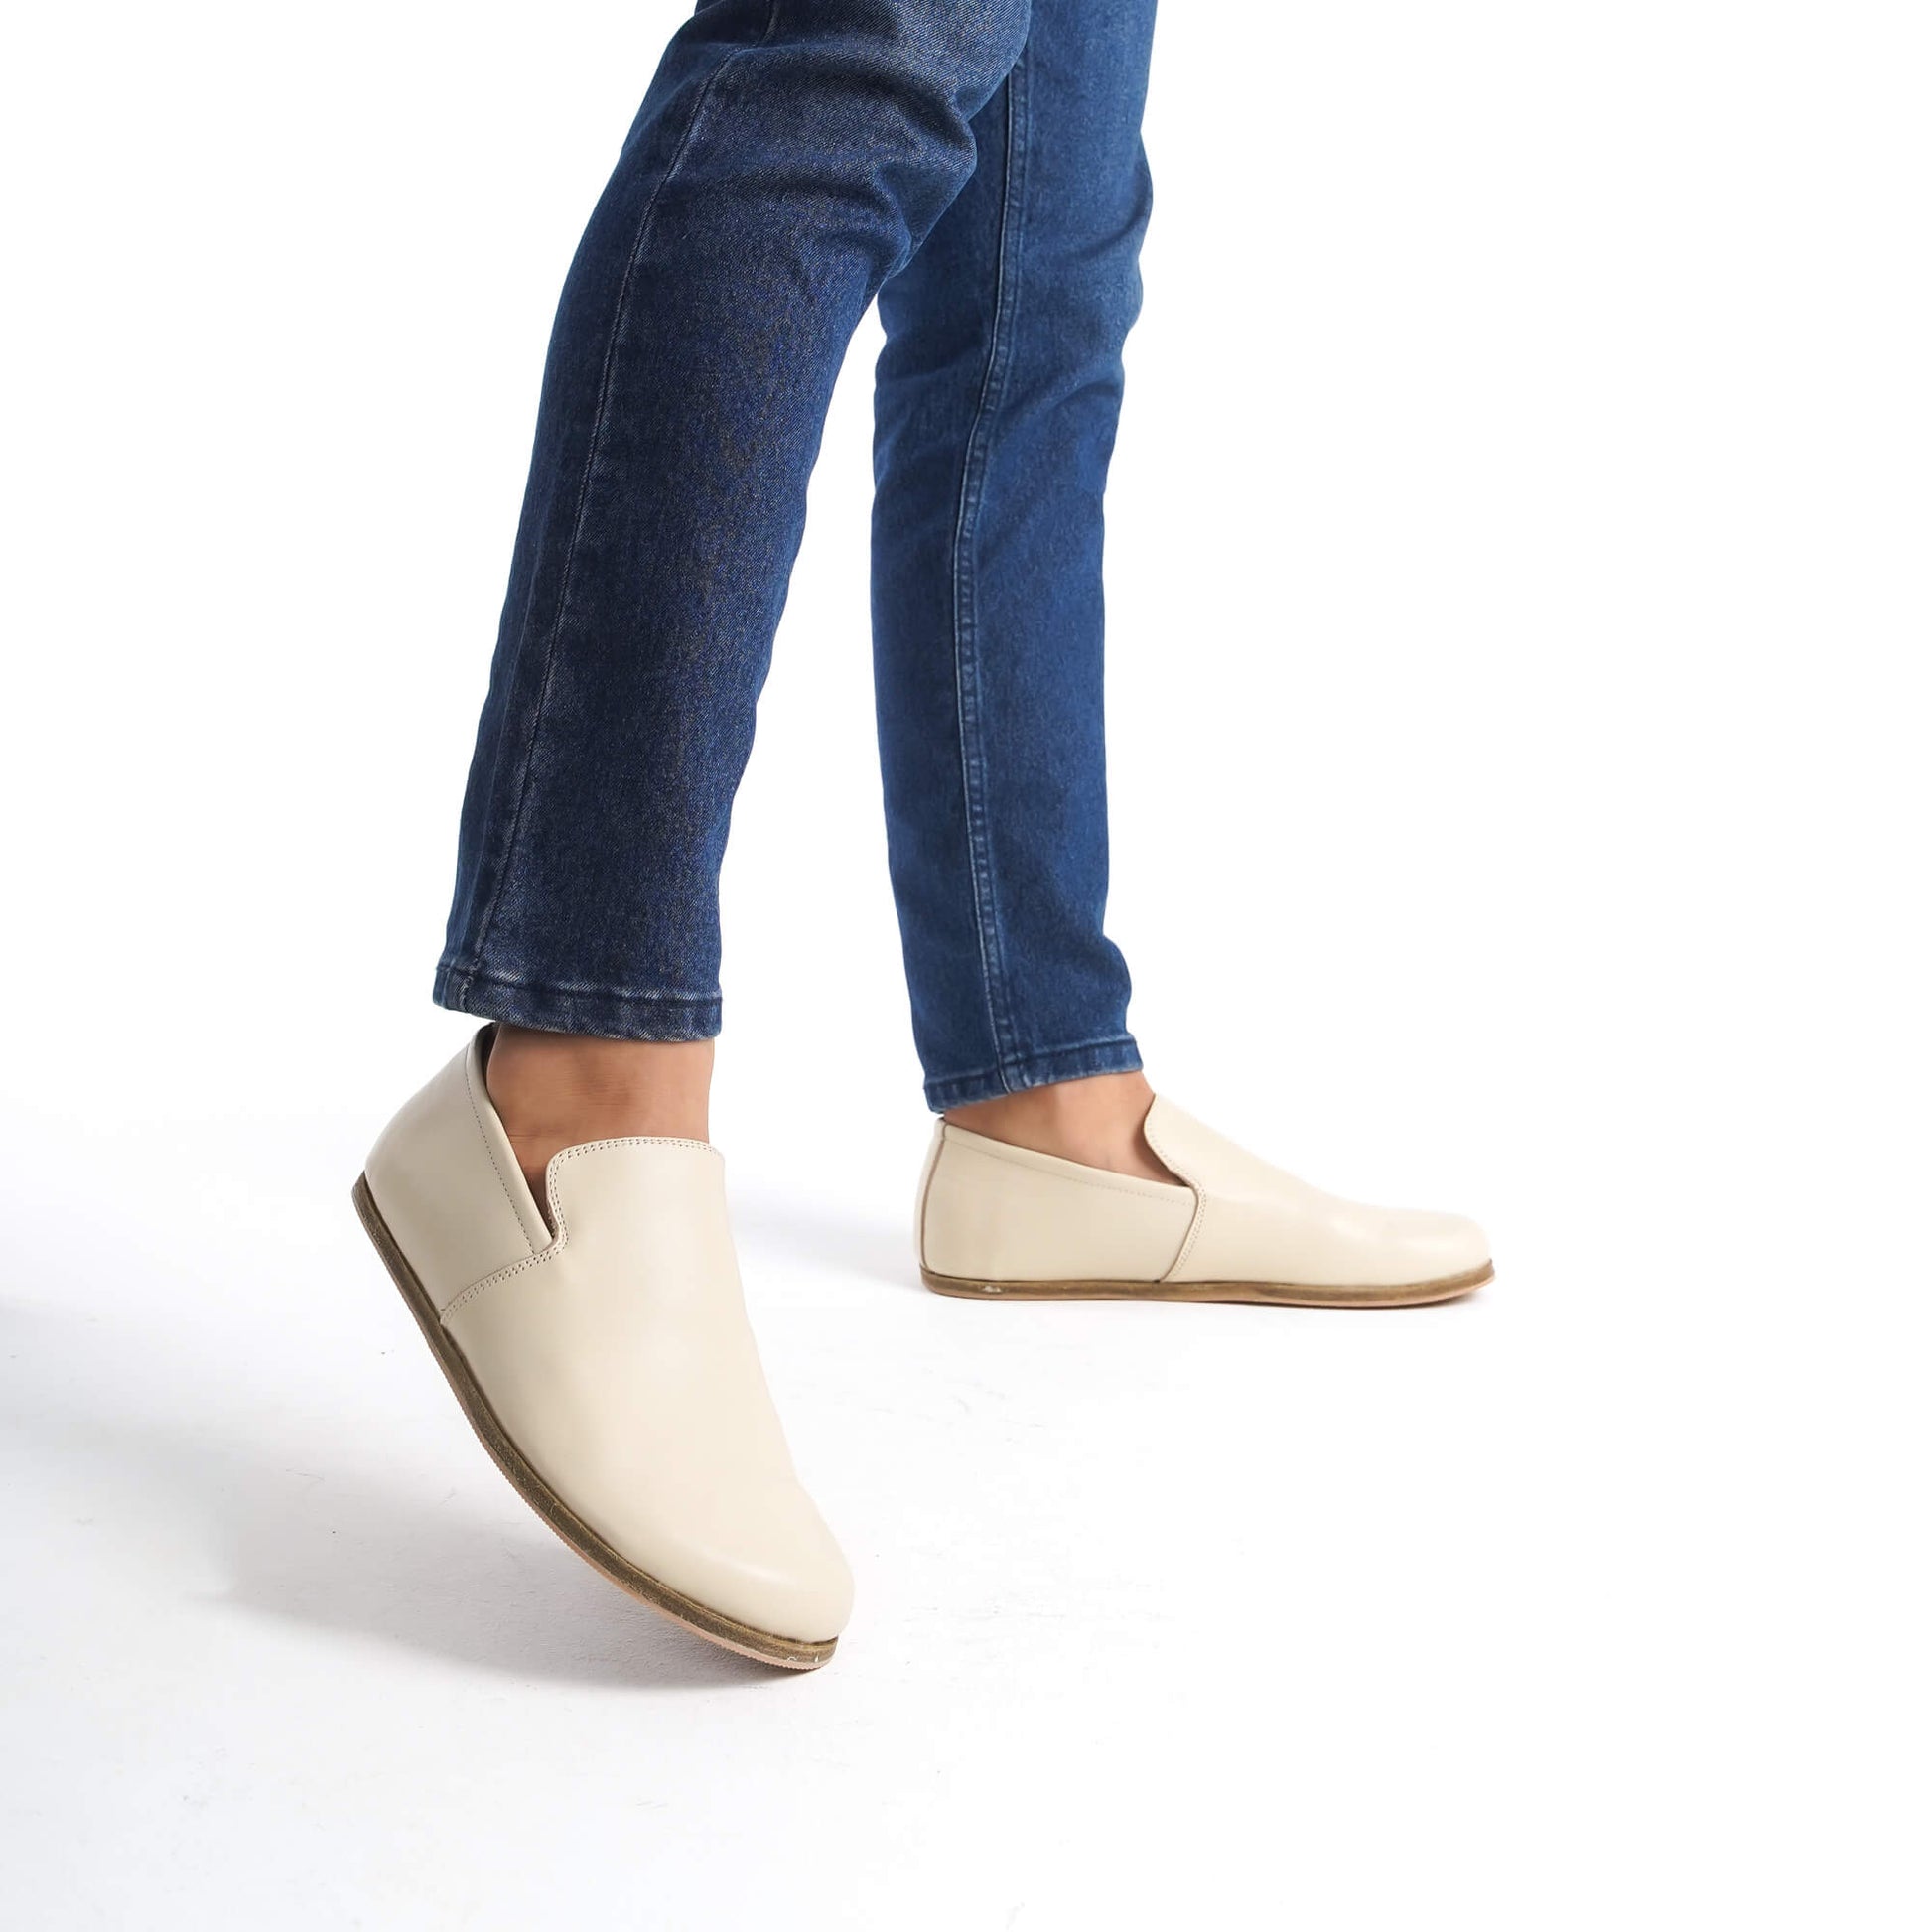 Men's feet wearing Aeolia Leather Barefoot Men Loafers in beige with blue jeans - shop at pelanir.com.